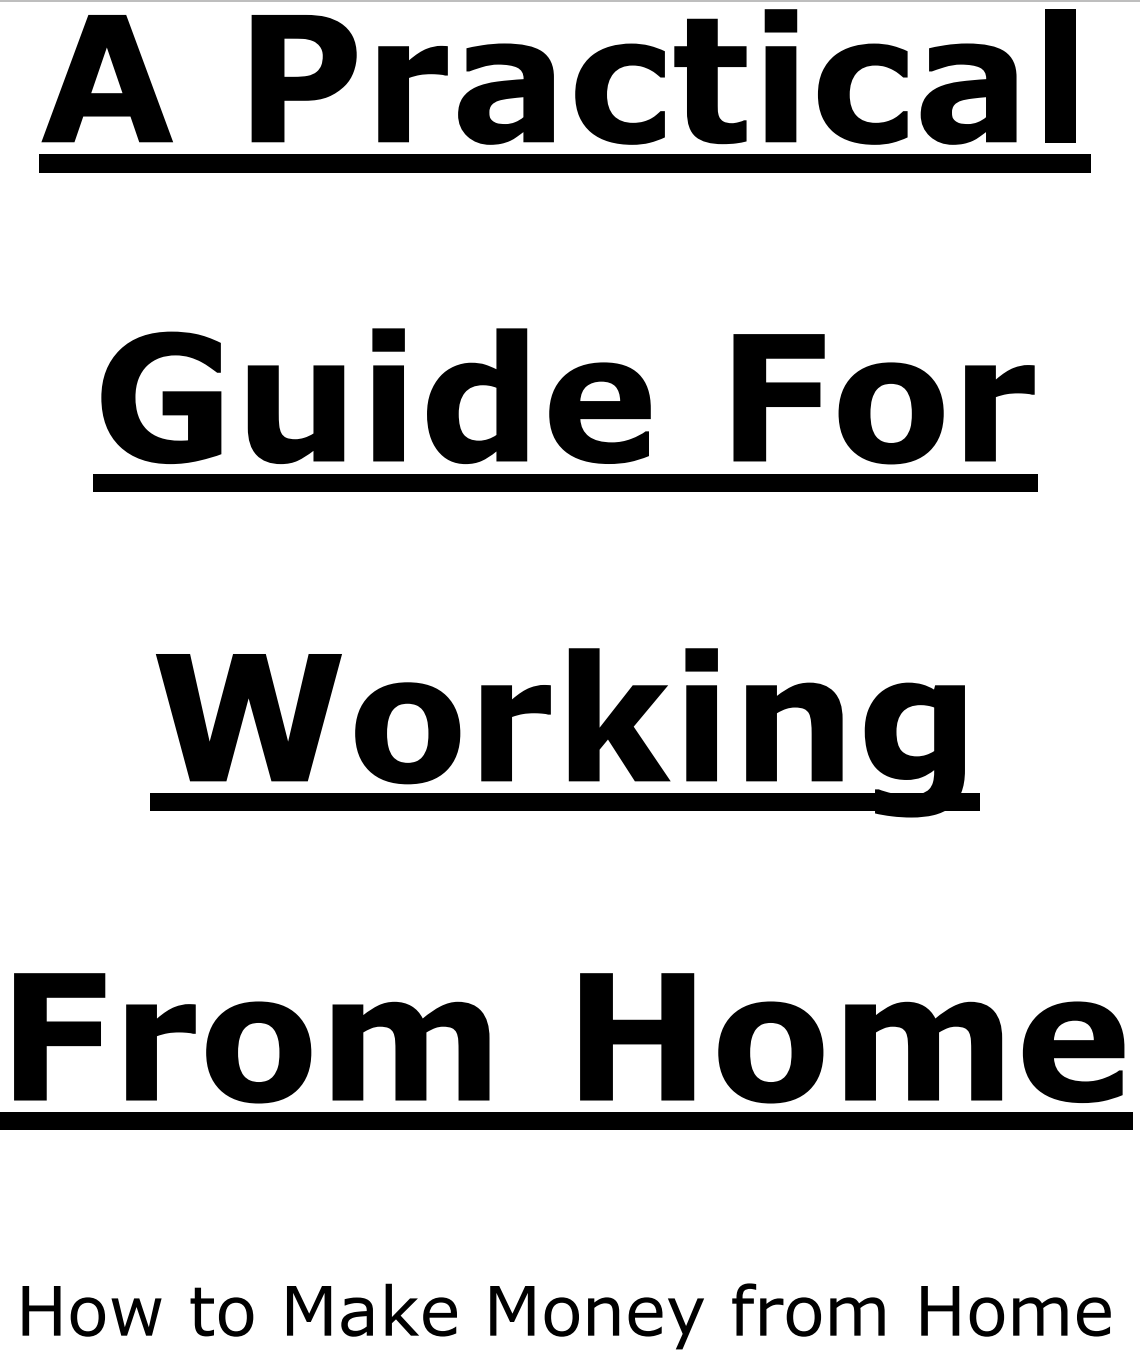 The Practical Guide For Working From Home